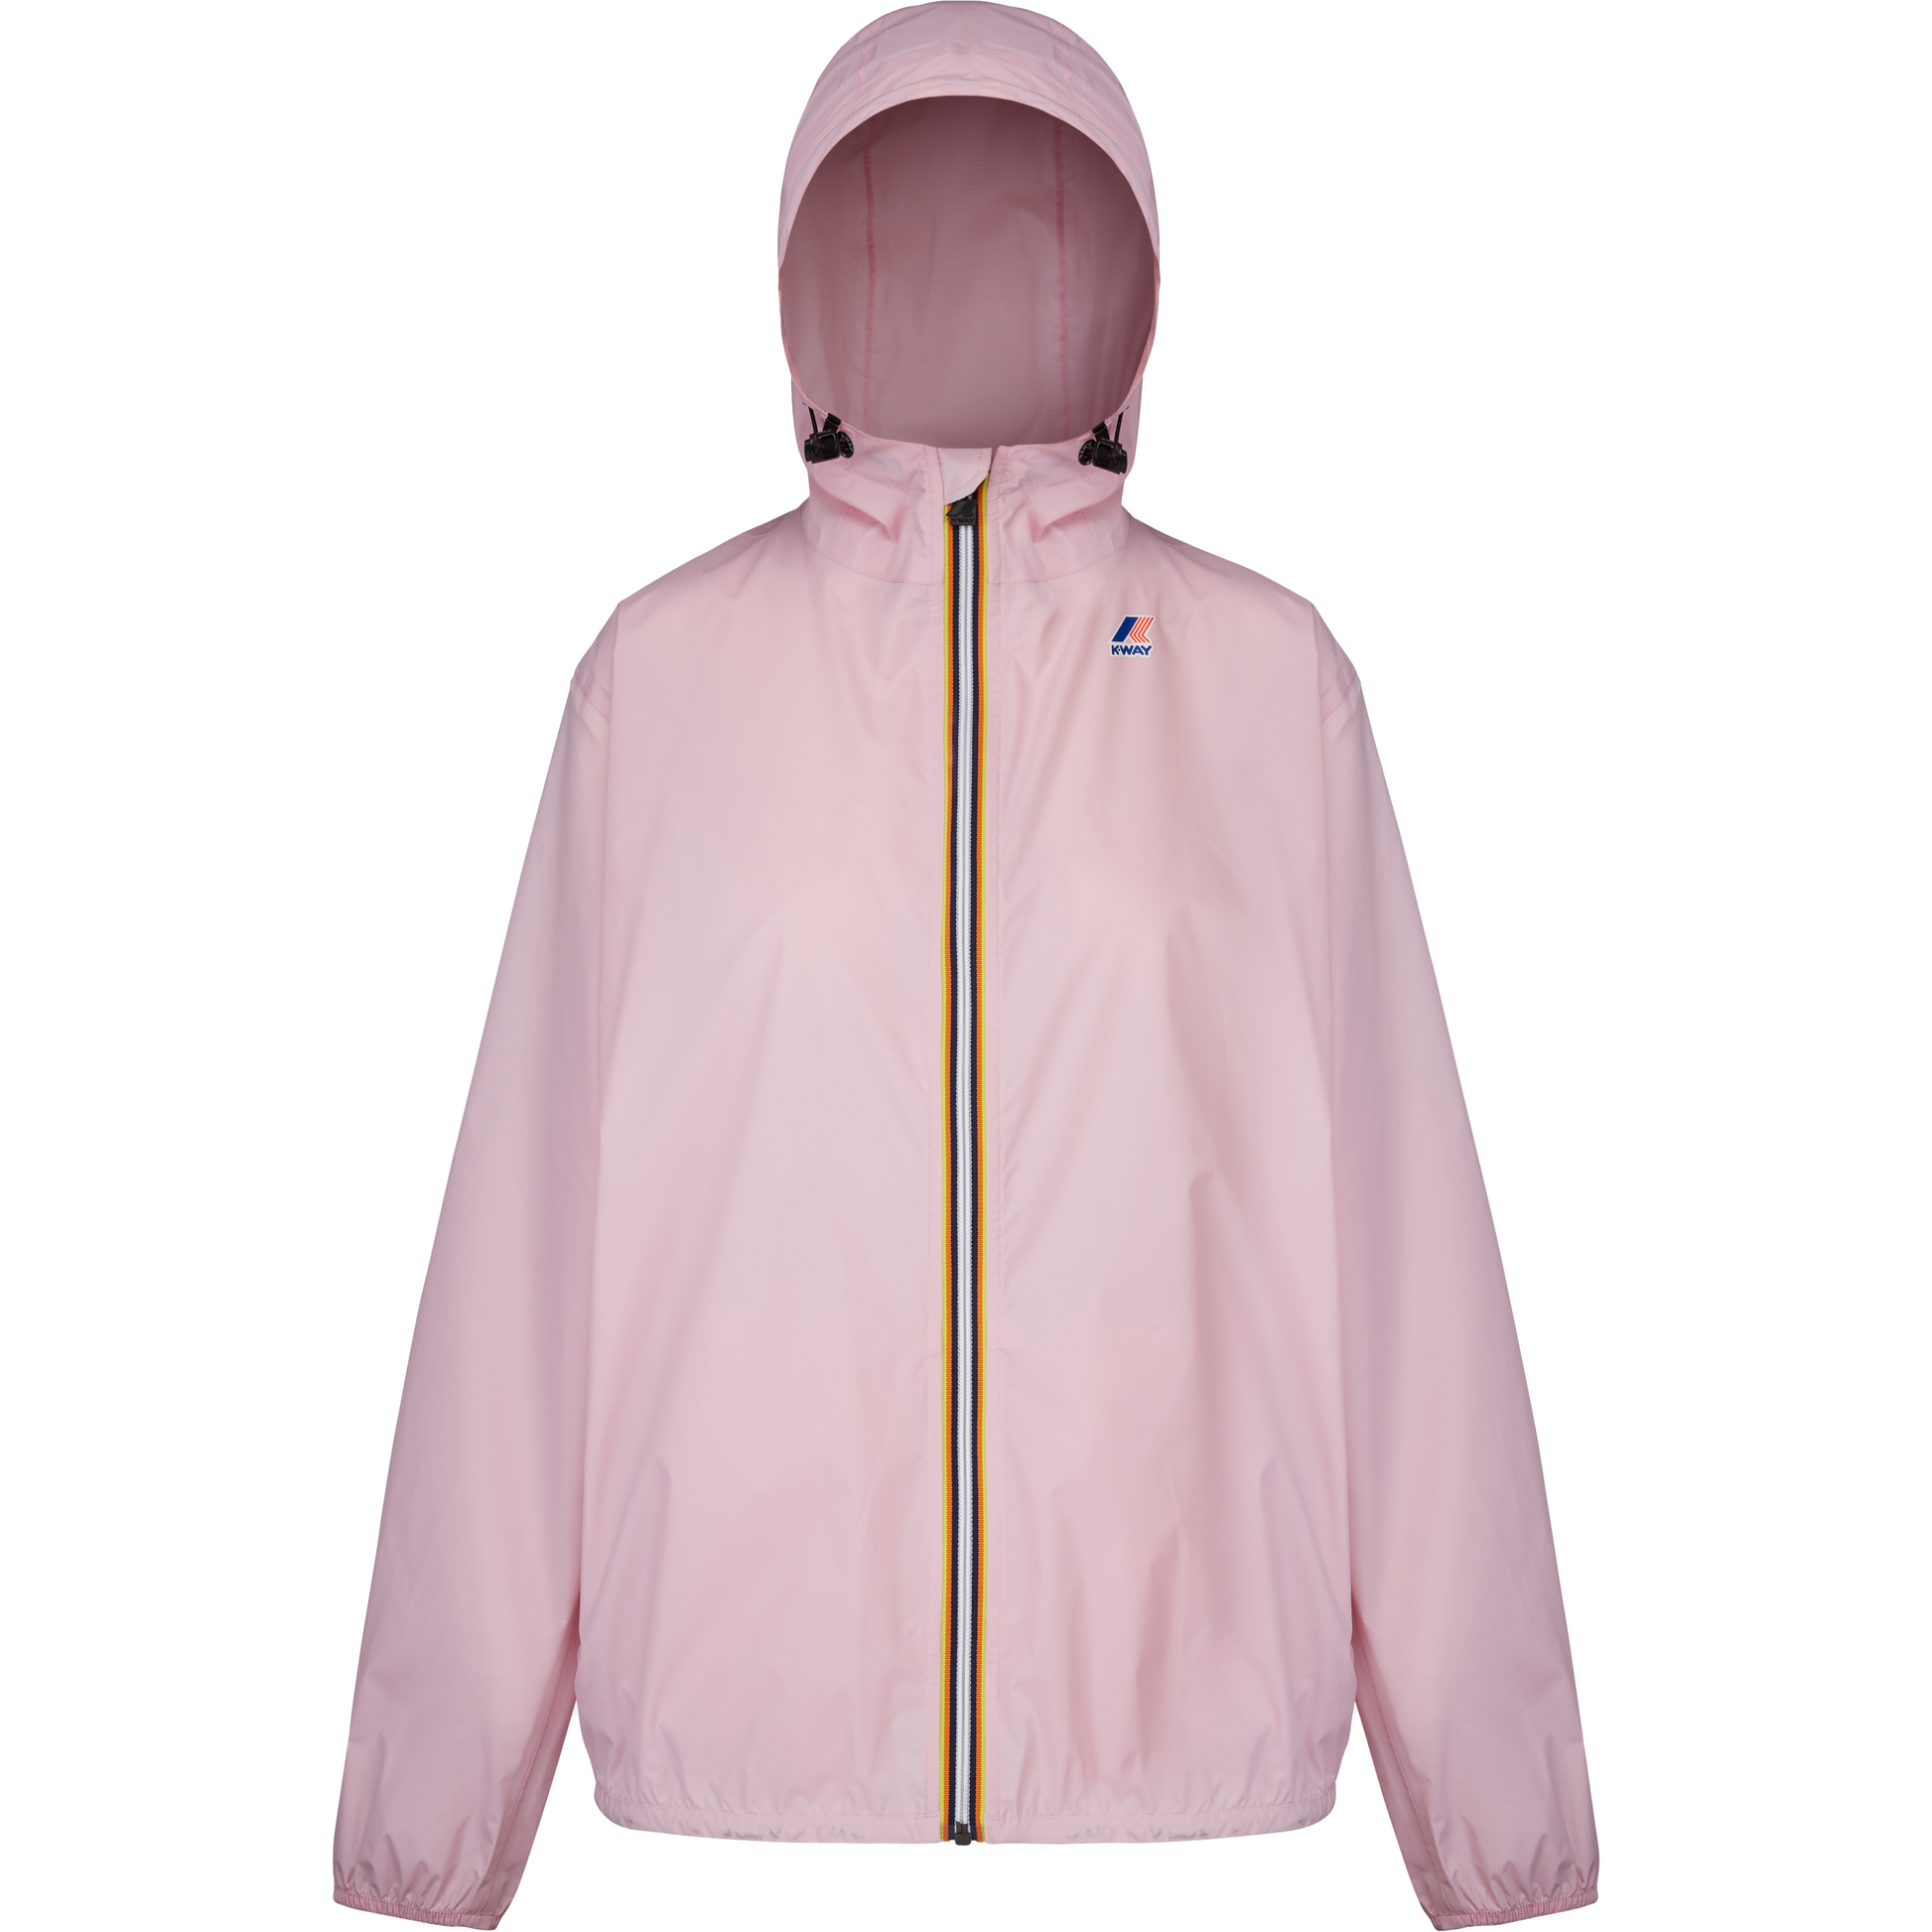 Light pink K-Way Le Vrai 3.0 Claude unisex jacket with a hood and a yellow zipper, displayed against a plain white background.